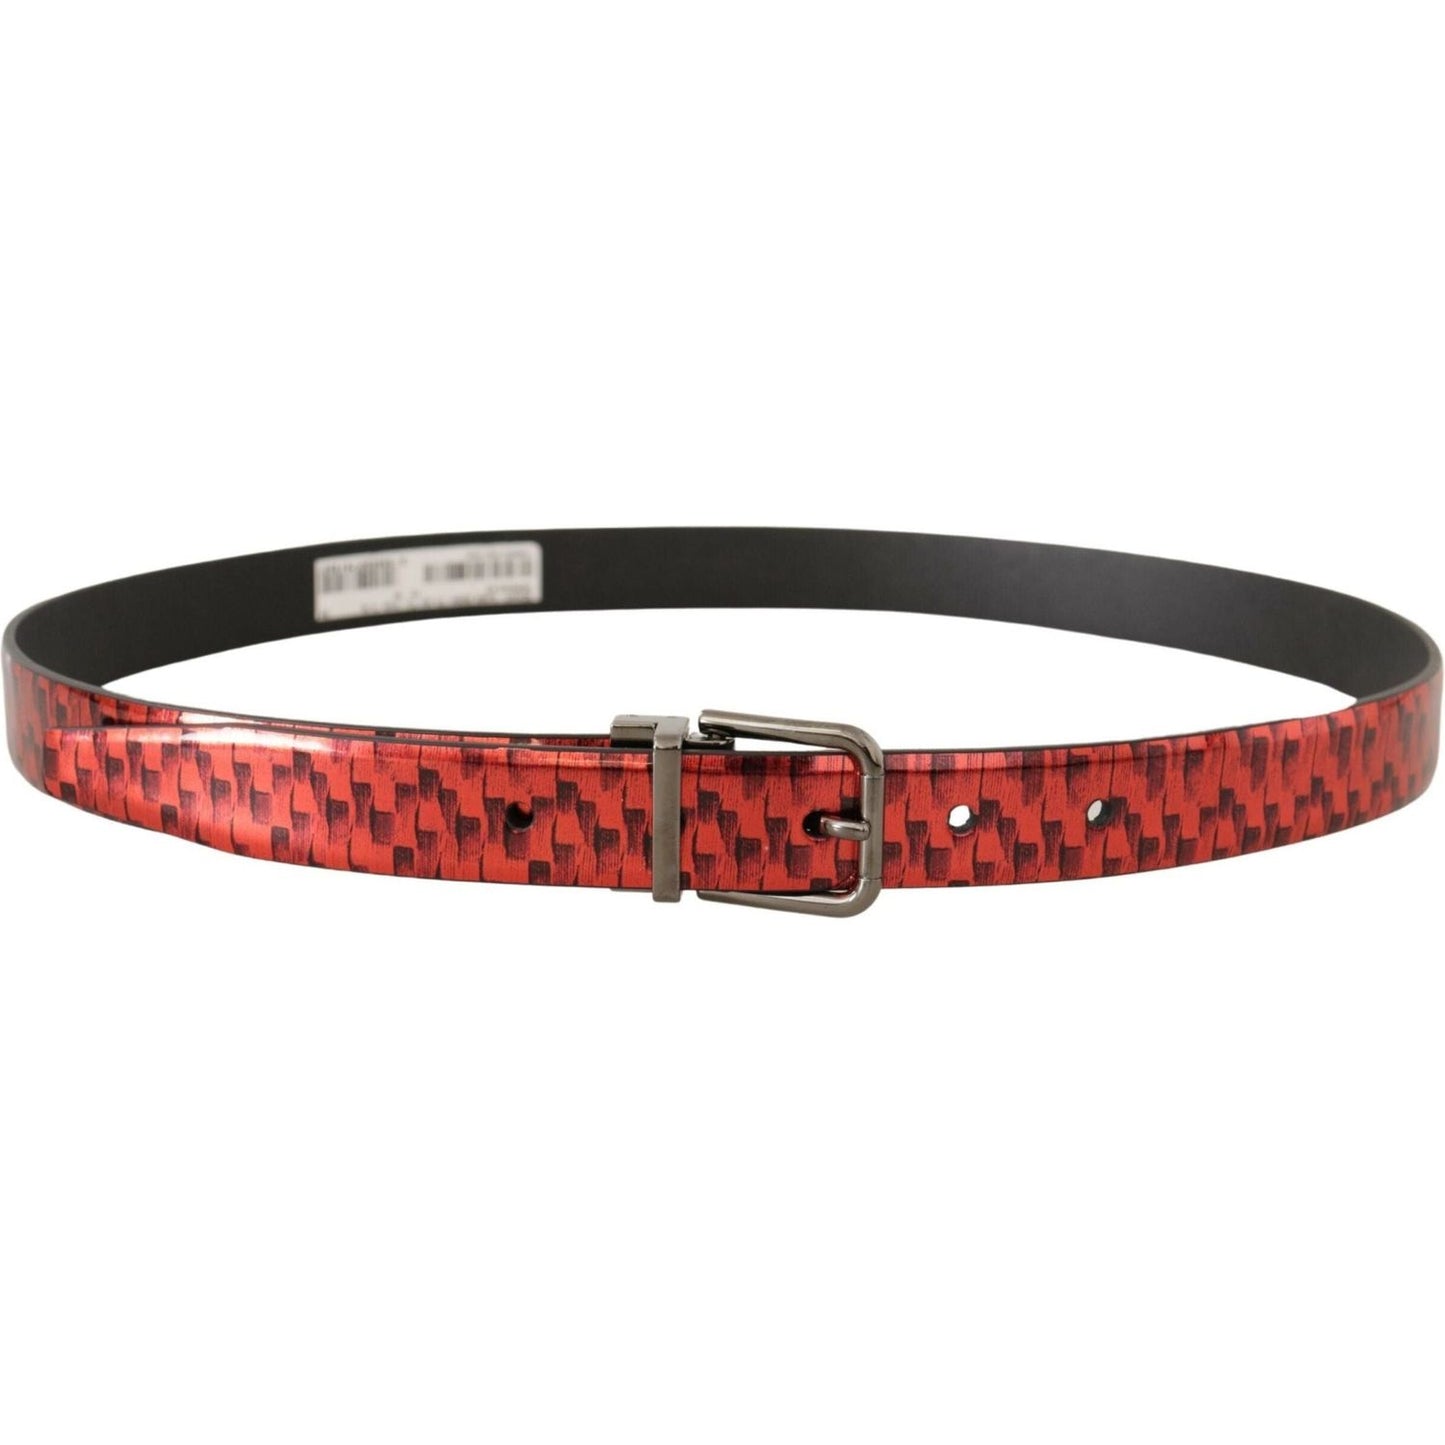 Dolce & Gabbana Elegant Red Leather Belt with Silver Buckle red-herringbone-leather-gray-tone-buckle-belt IMG_7727-scaled-1bf124a0-62e.jpg